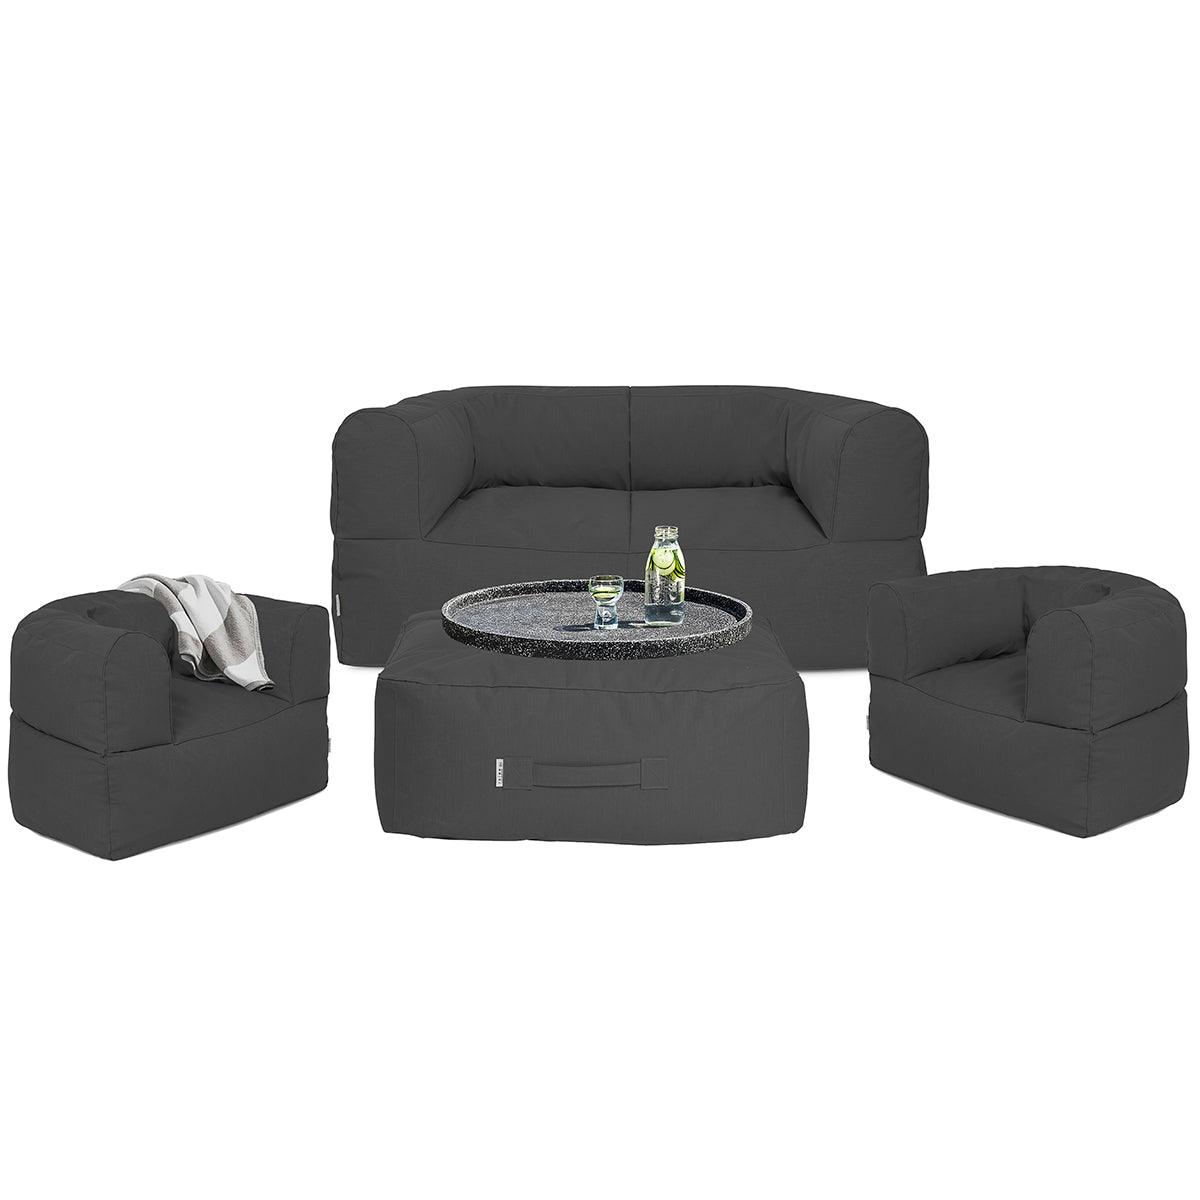 Arm-Strong Outdoor Lounge Set - WOO .Design